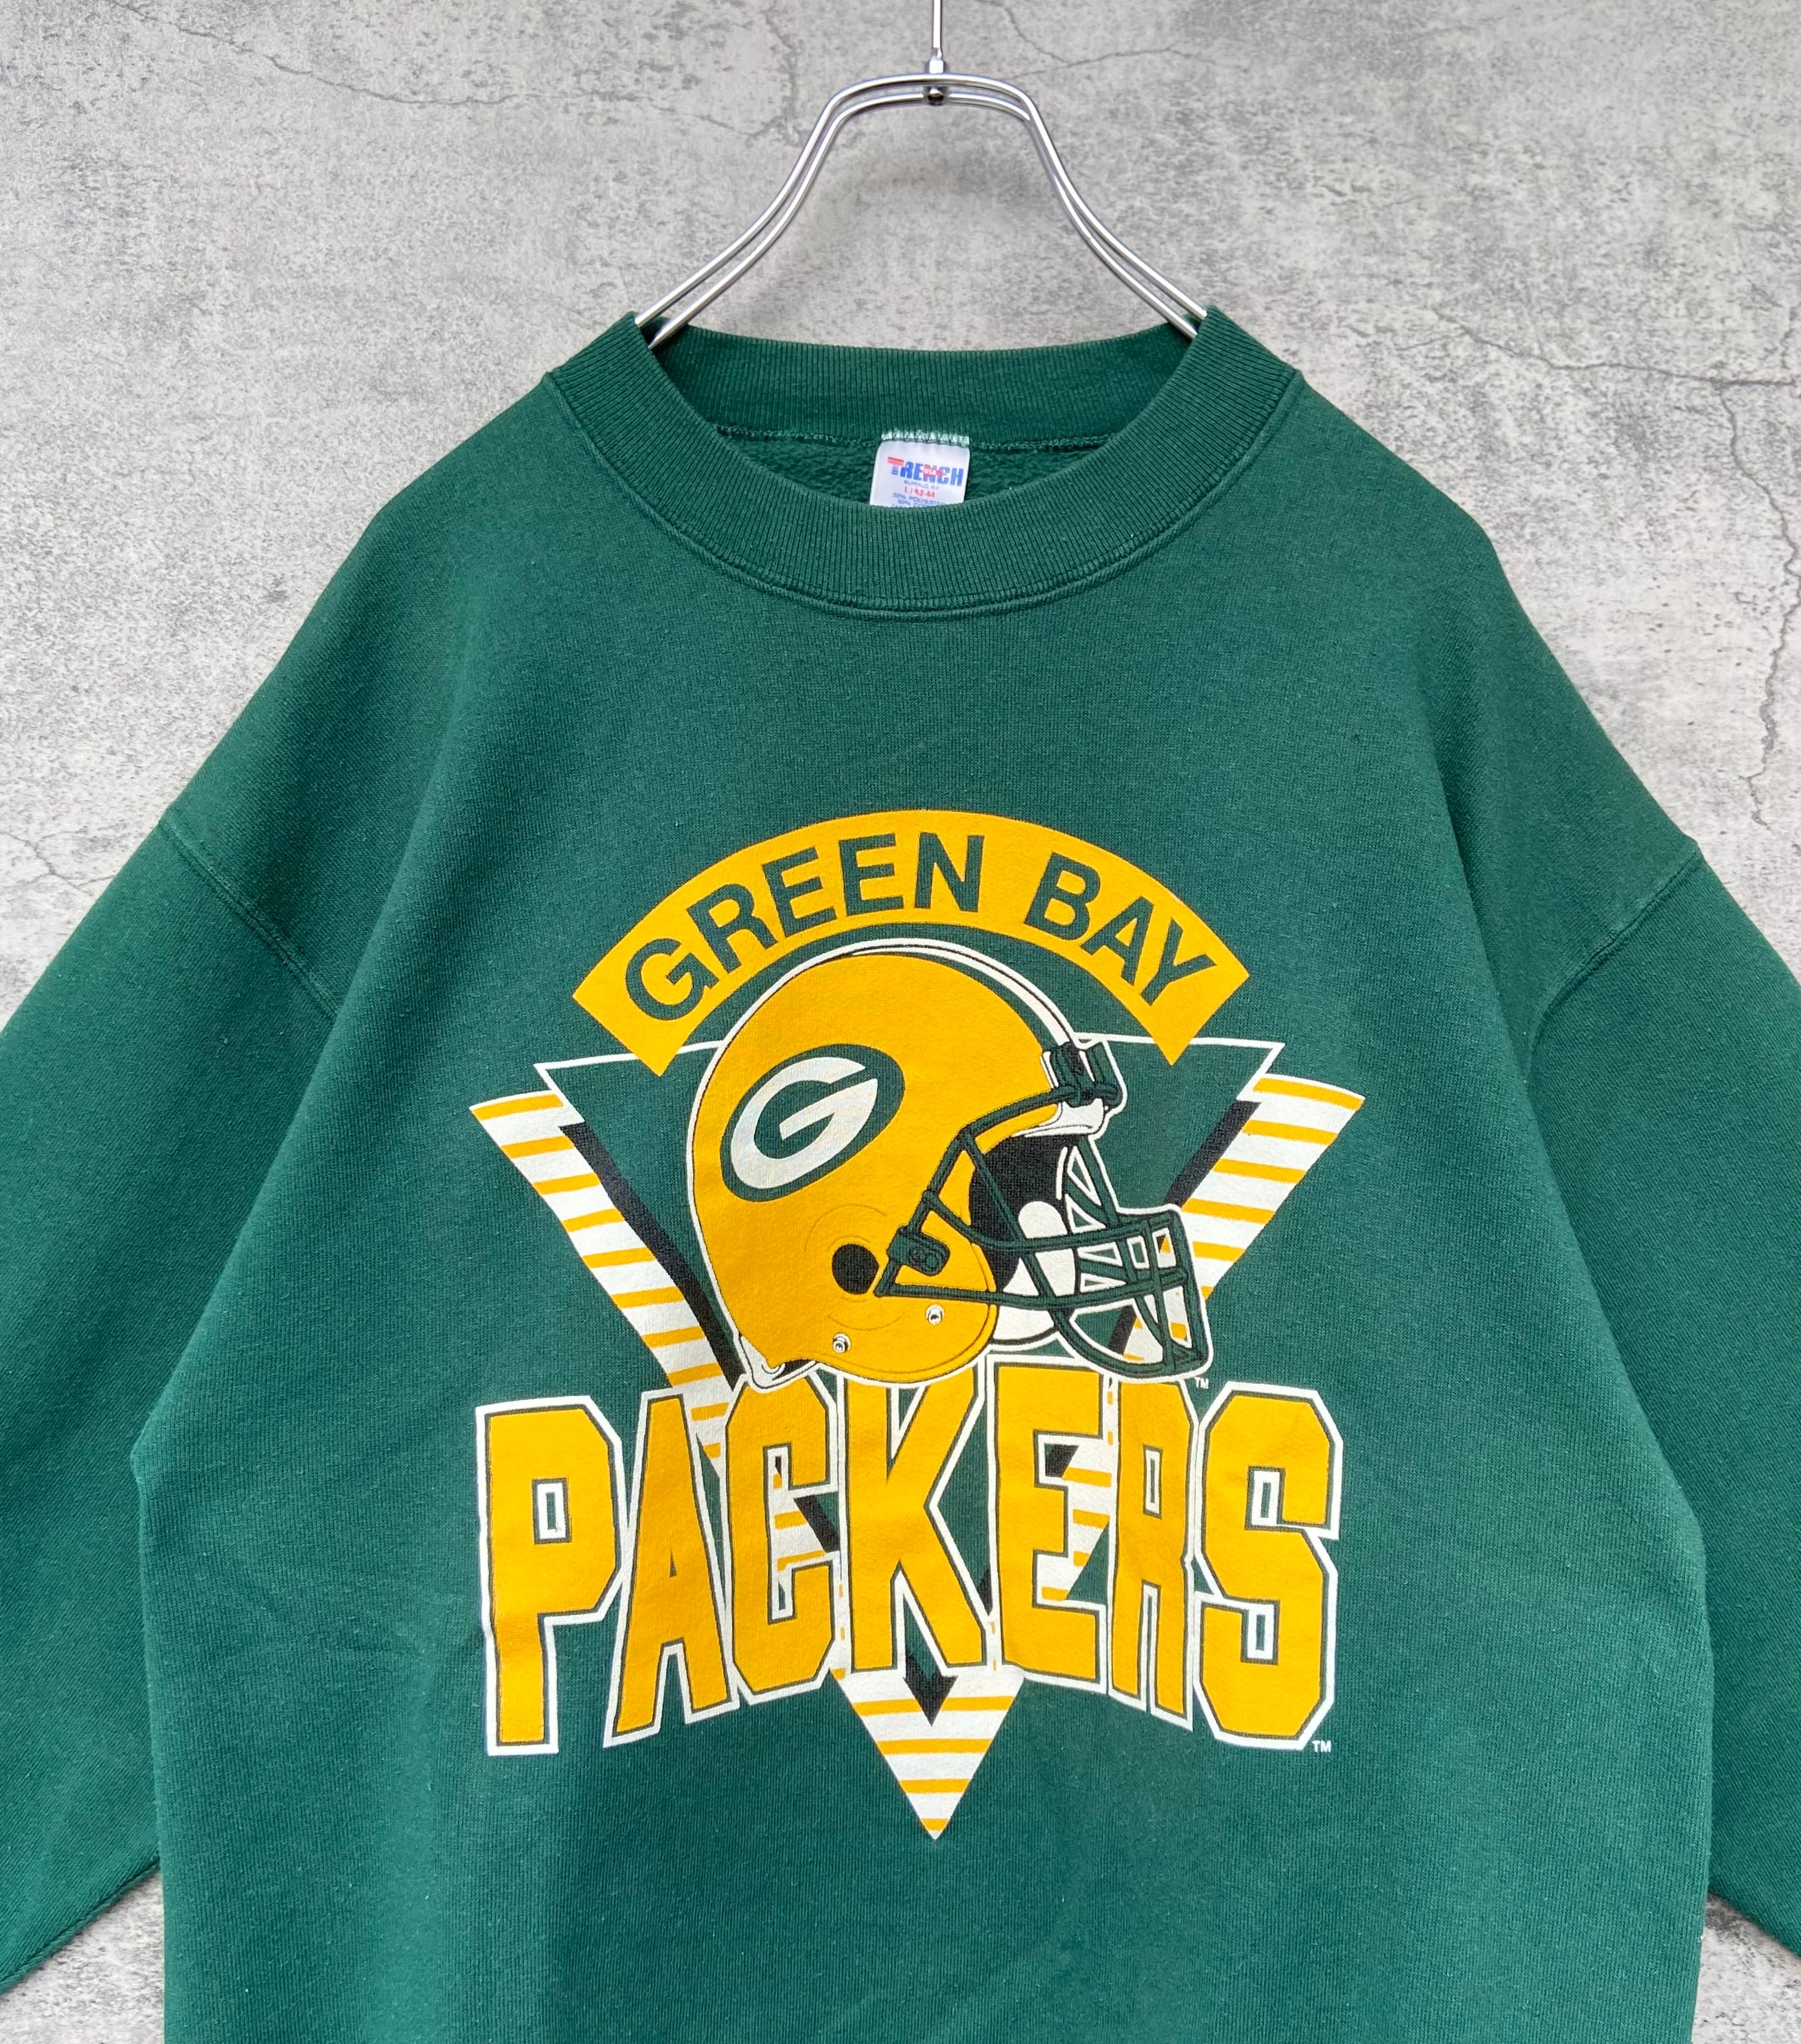 USA製 90s Green Bay Packers パッカーズ スウェット NFL 緑 デカロゴ